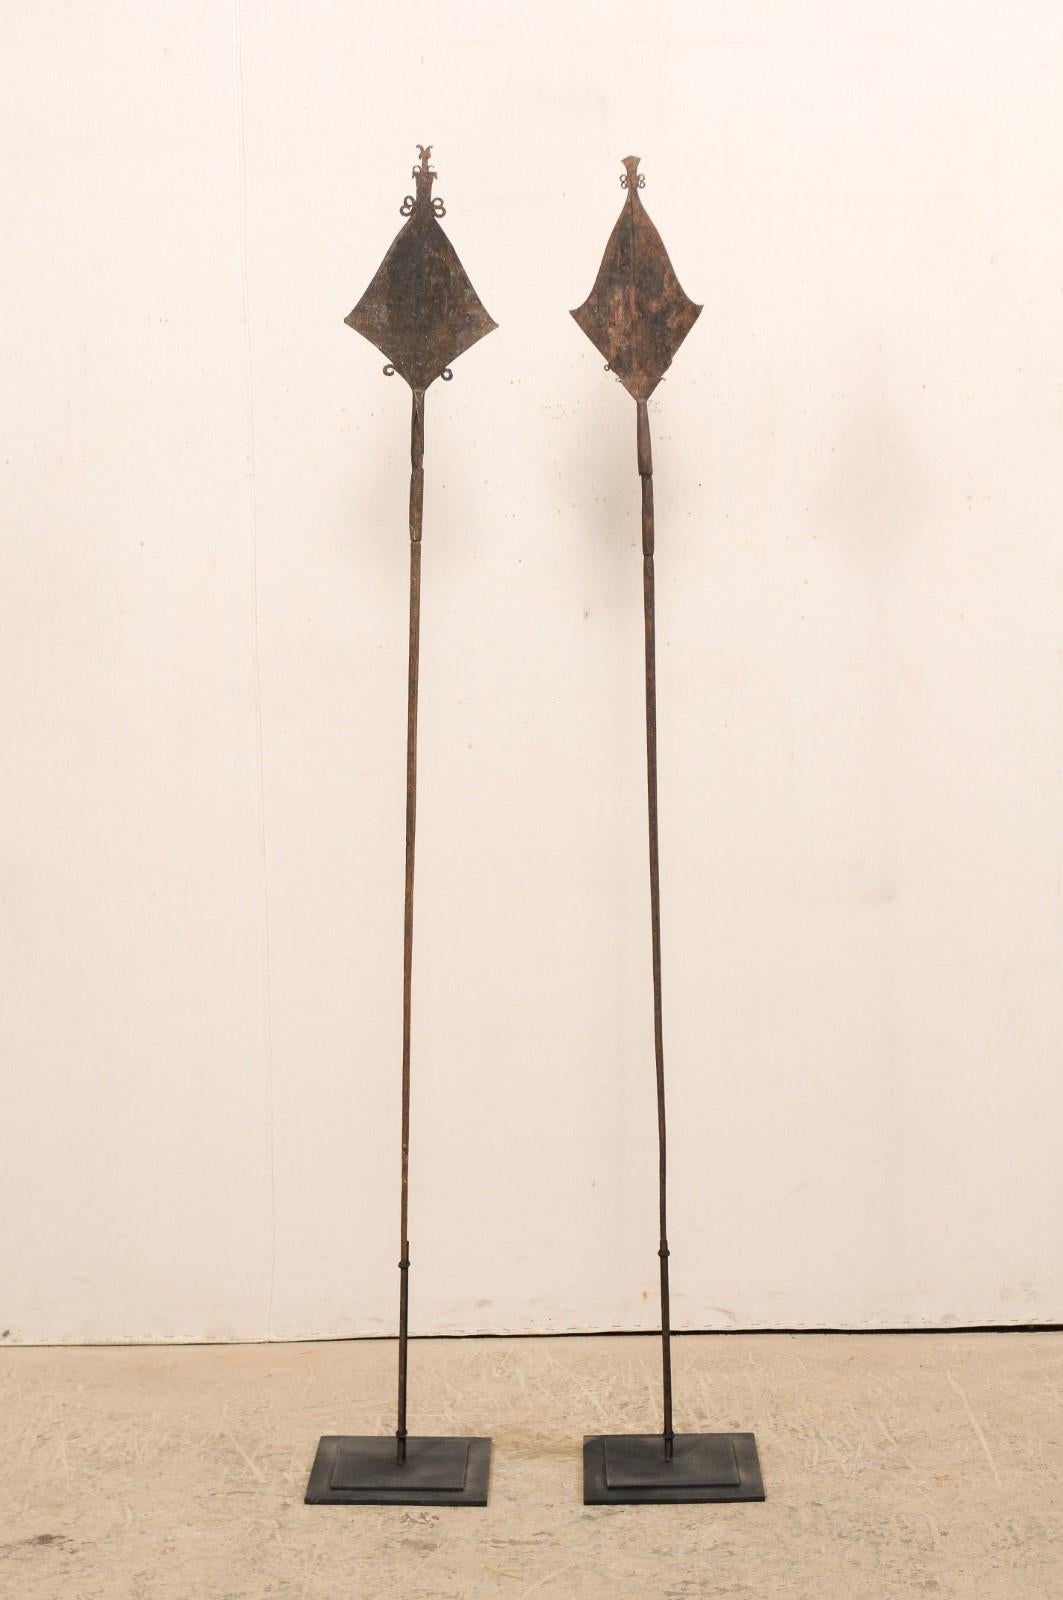 This is a pair of vintage African spear currencies from the Mbole peoples, Democratic Republic of Congo which are nicely presented upon custom metal stands. These African currencies take their name from their spear-shaped tip design, though due to